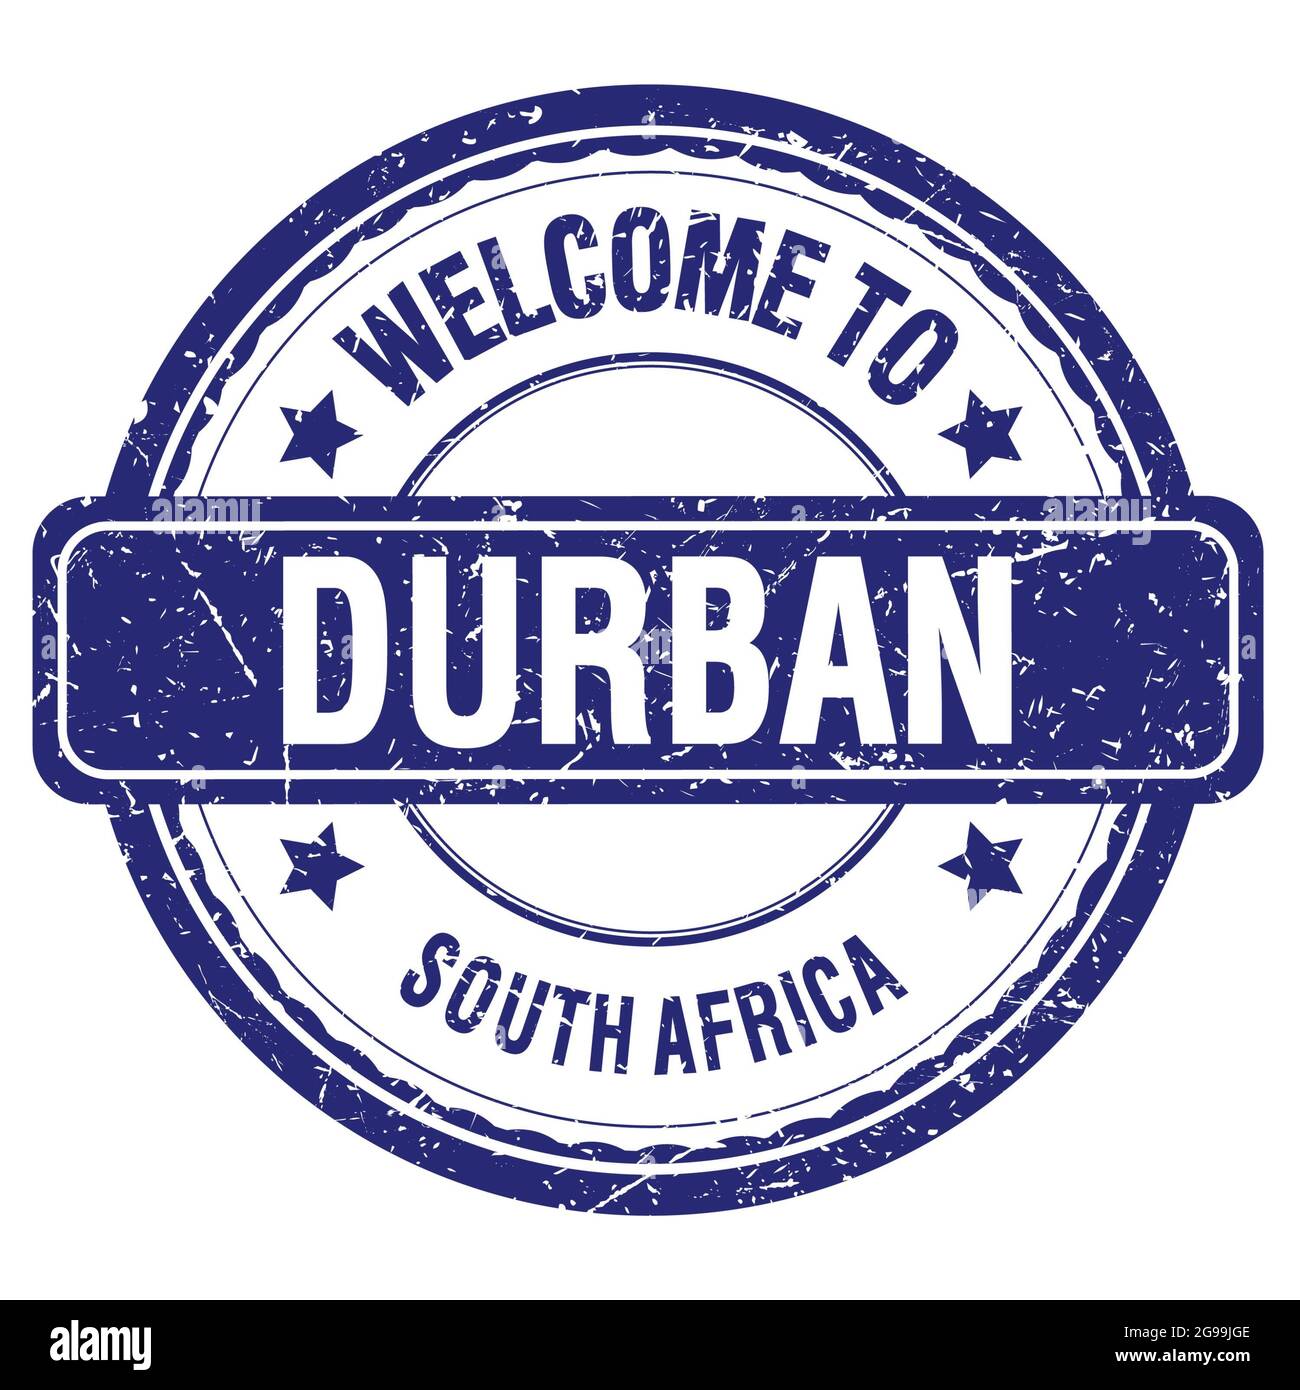 WELCOME TO DURBAN - SOUTH AFRICA, words written on blue grungy stamp Stock Photo